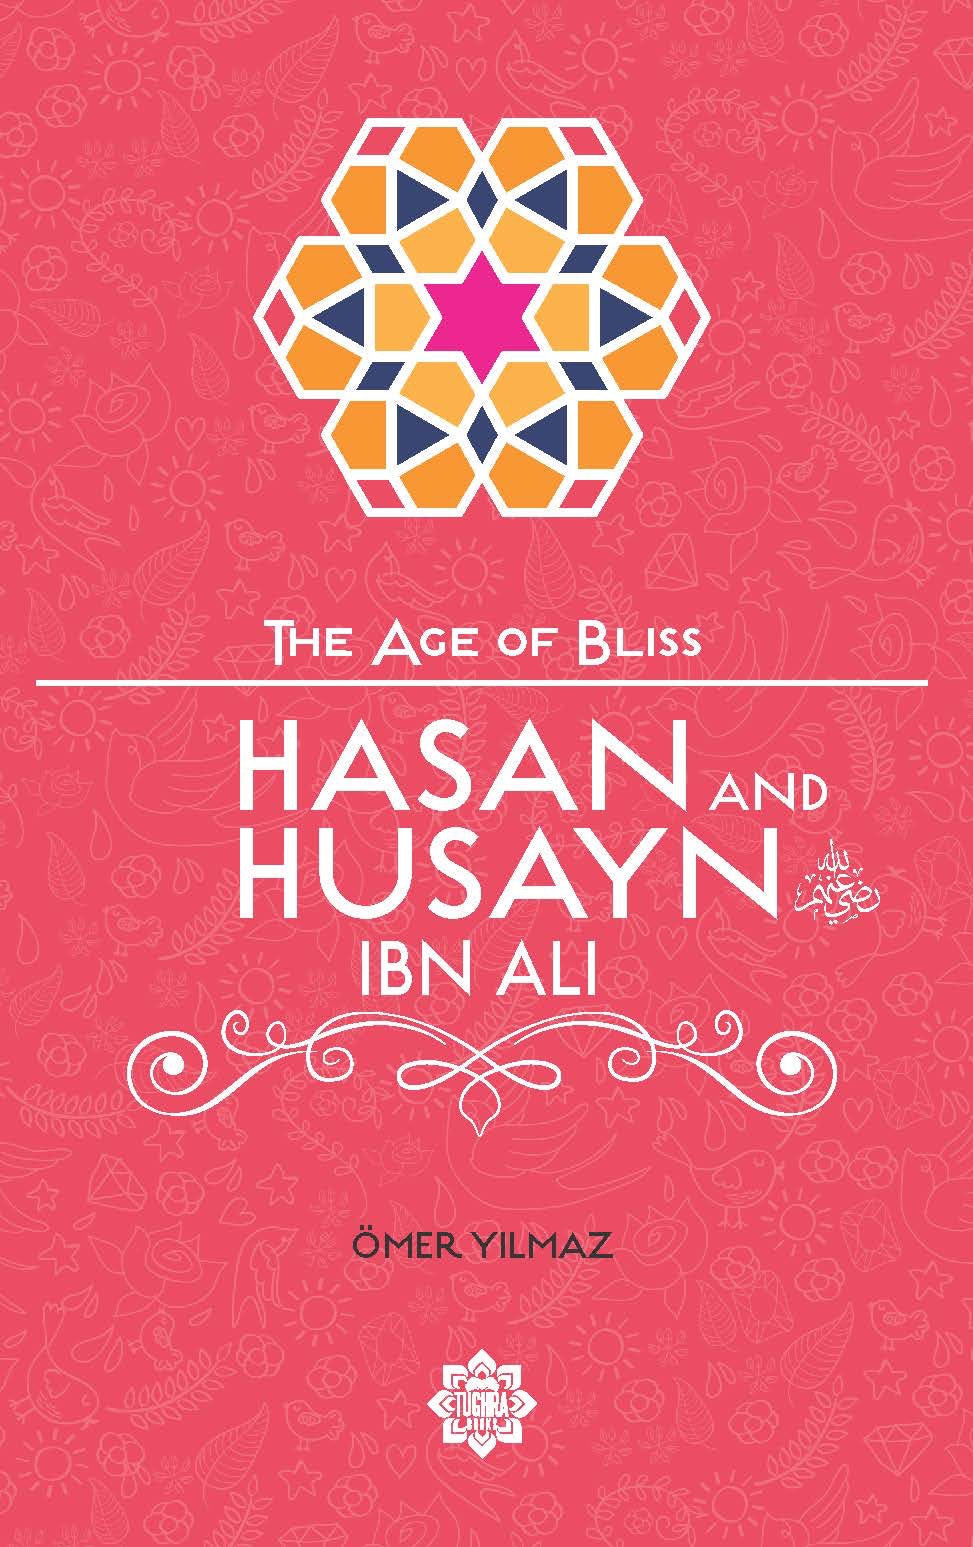 Hasan and Husayn ibn Ali (The Age of Bliss Series)